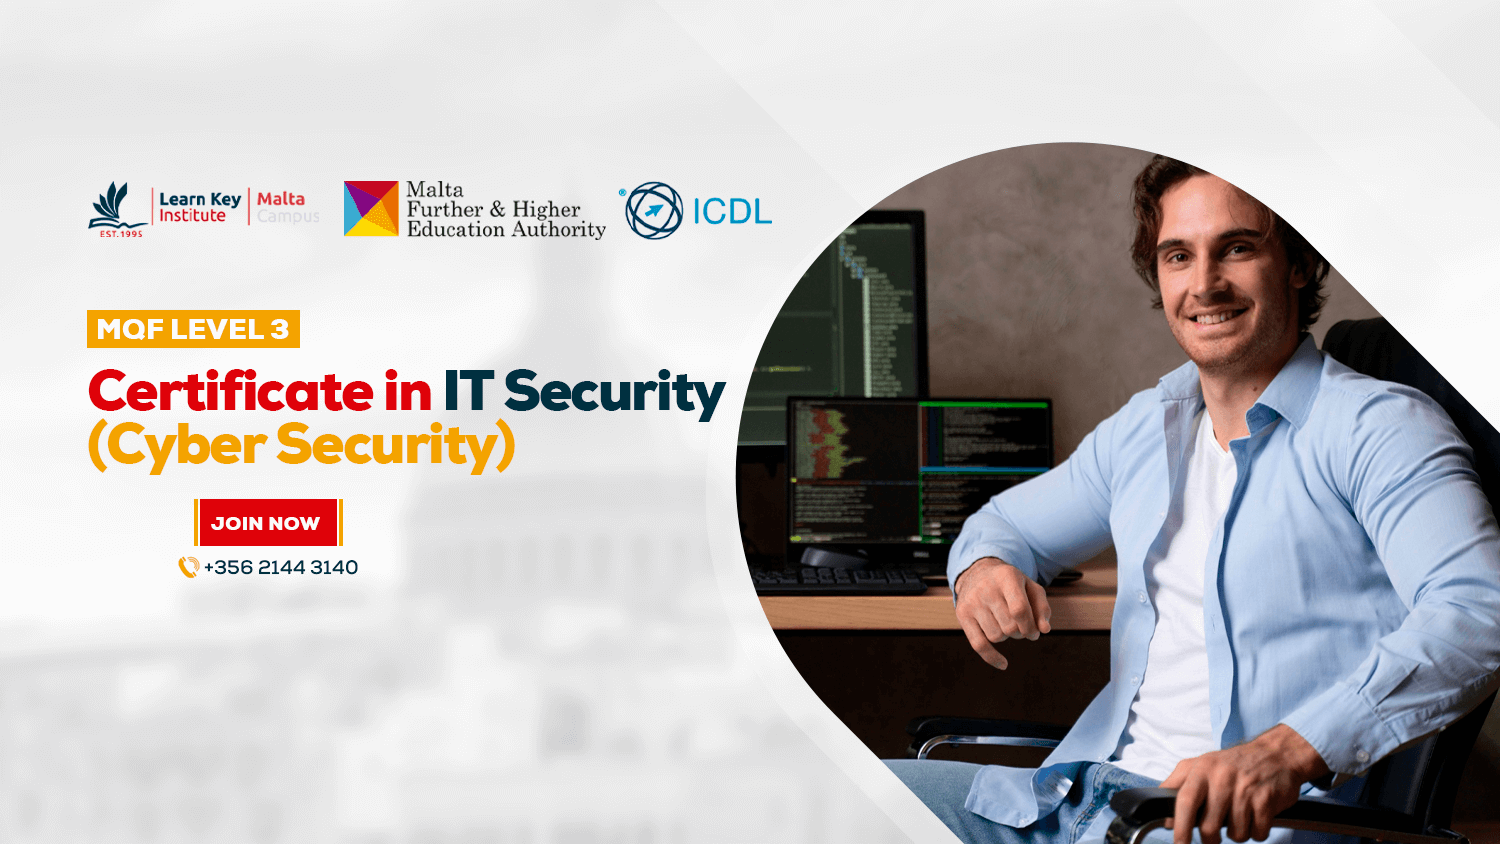 MQF Level 3 Certificate in IT Security (Cyber Security)